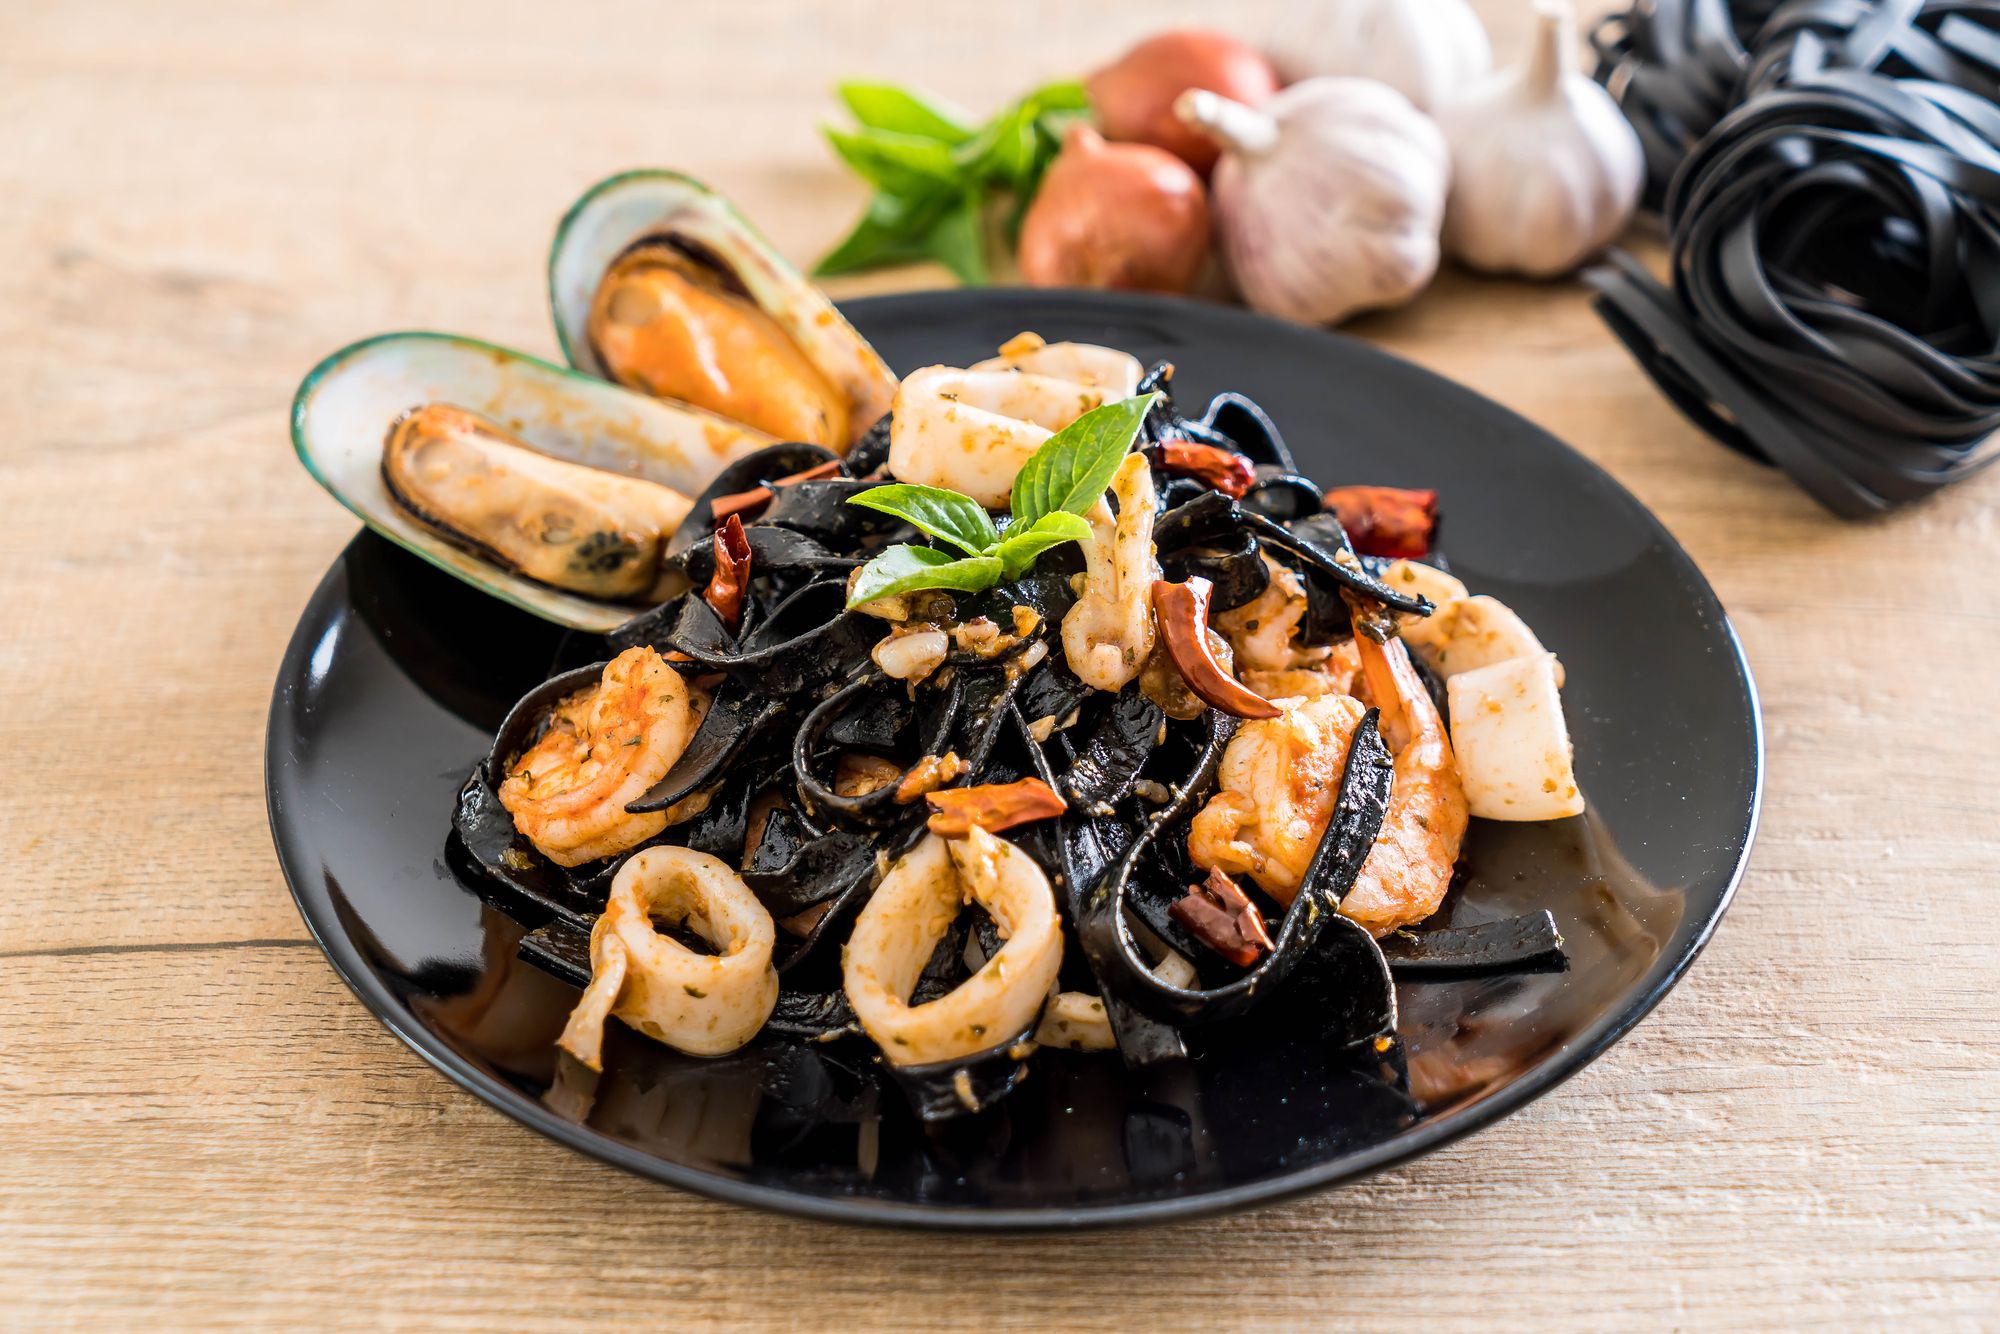 Squid Ink Linguine with Garlic Seafood